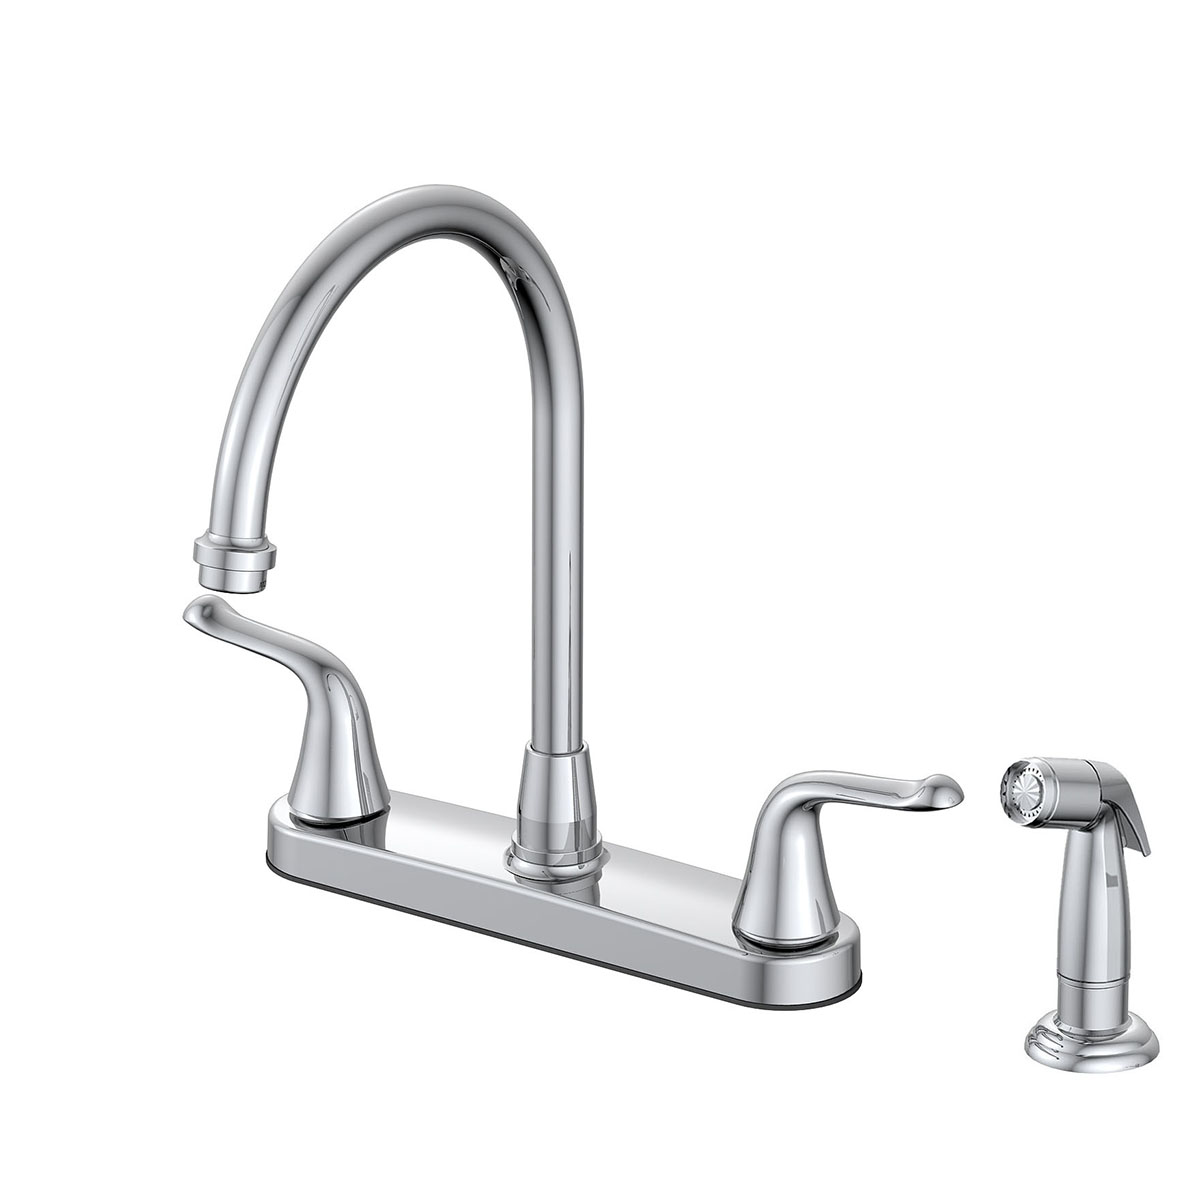 Double-Handle Pull-Down Kitchen Faucet with Soap Dispenser